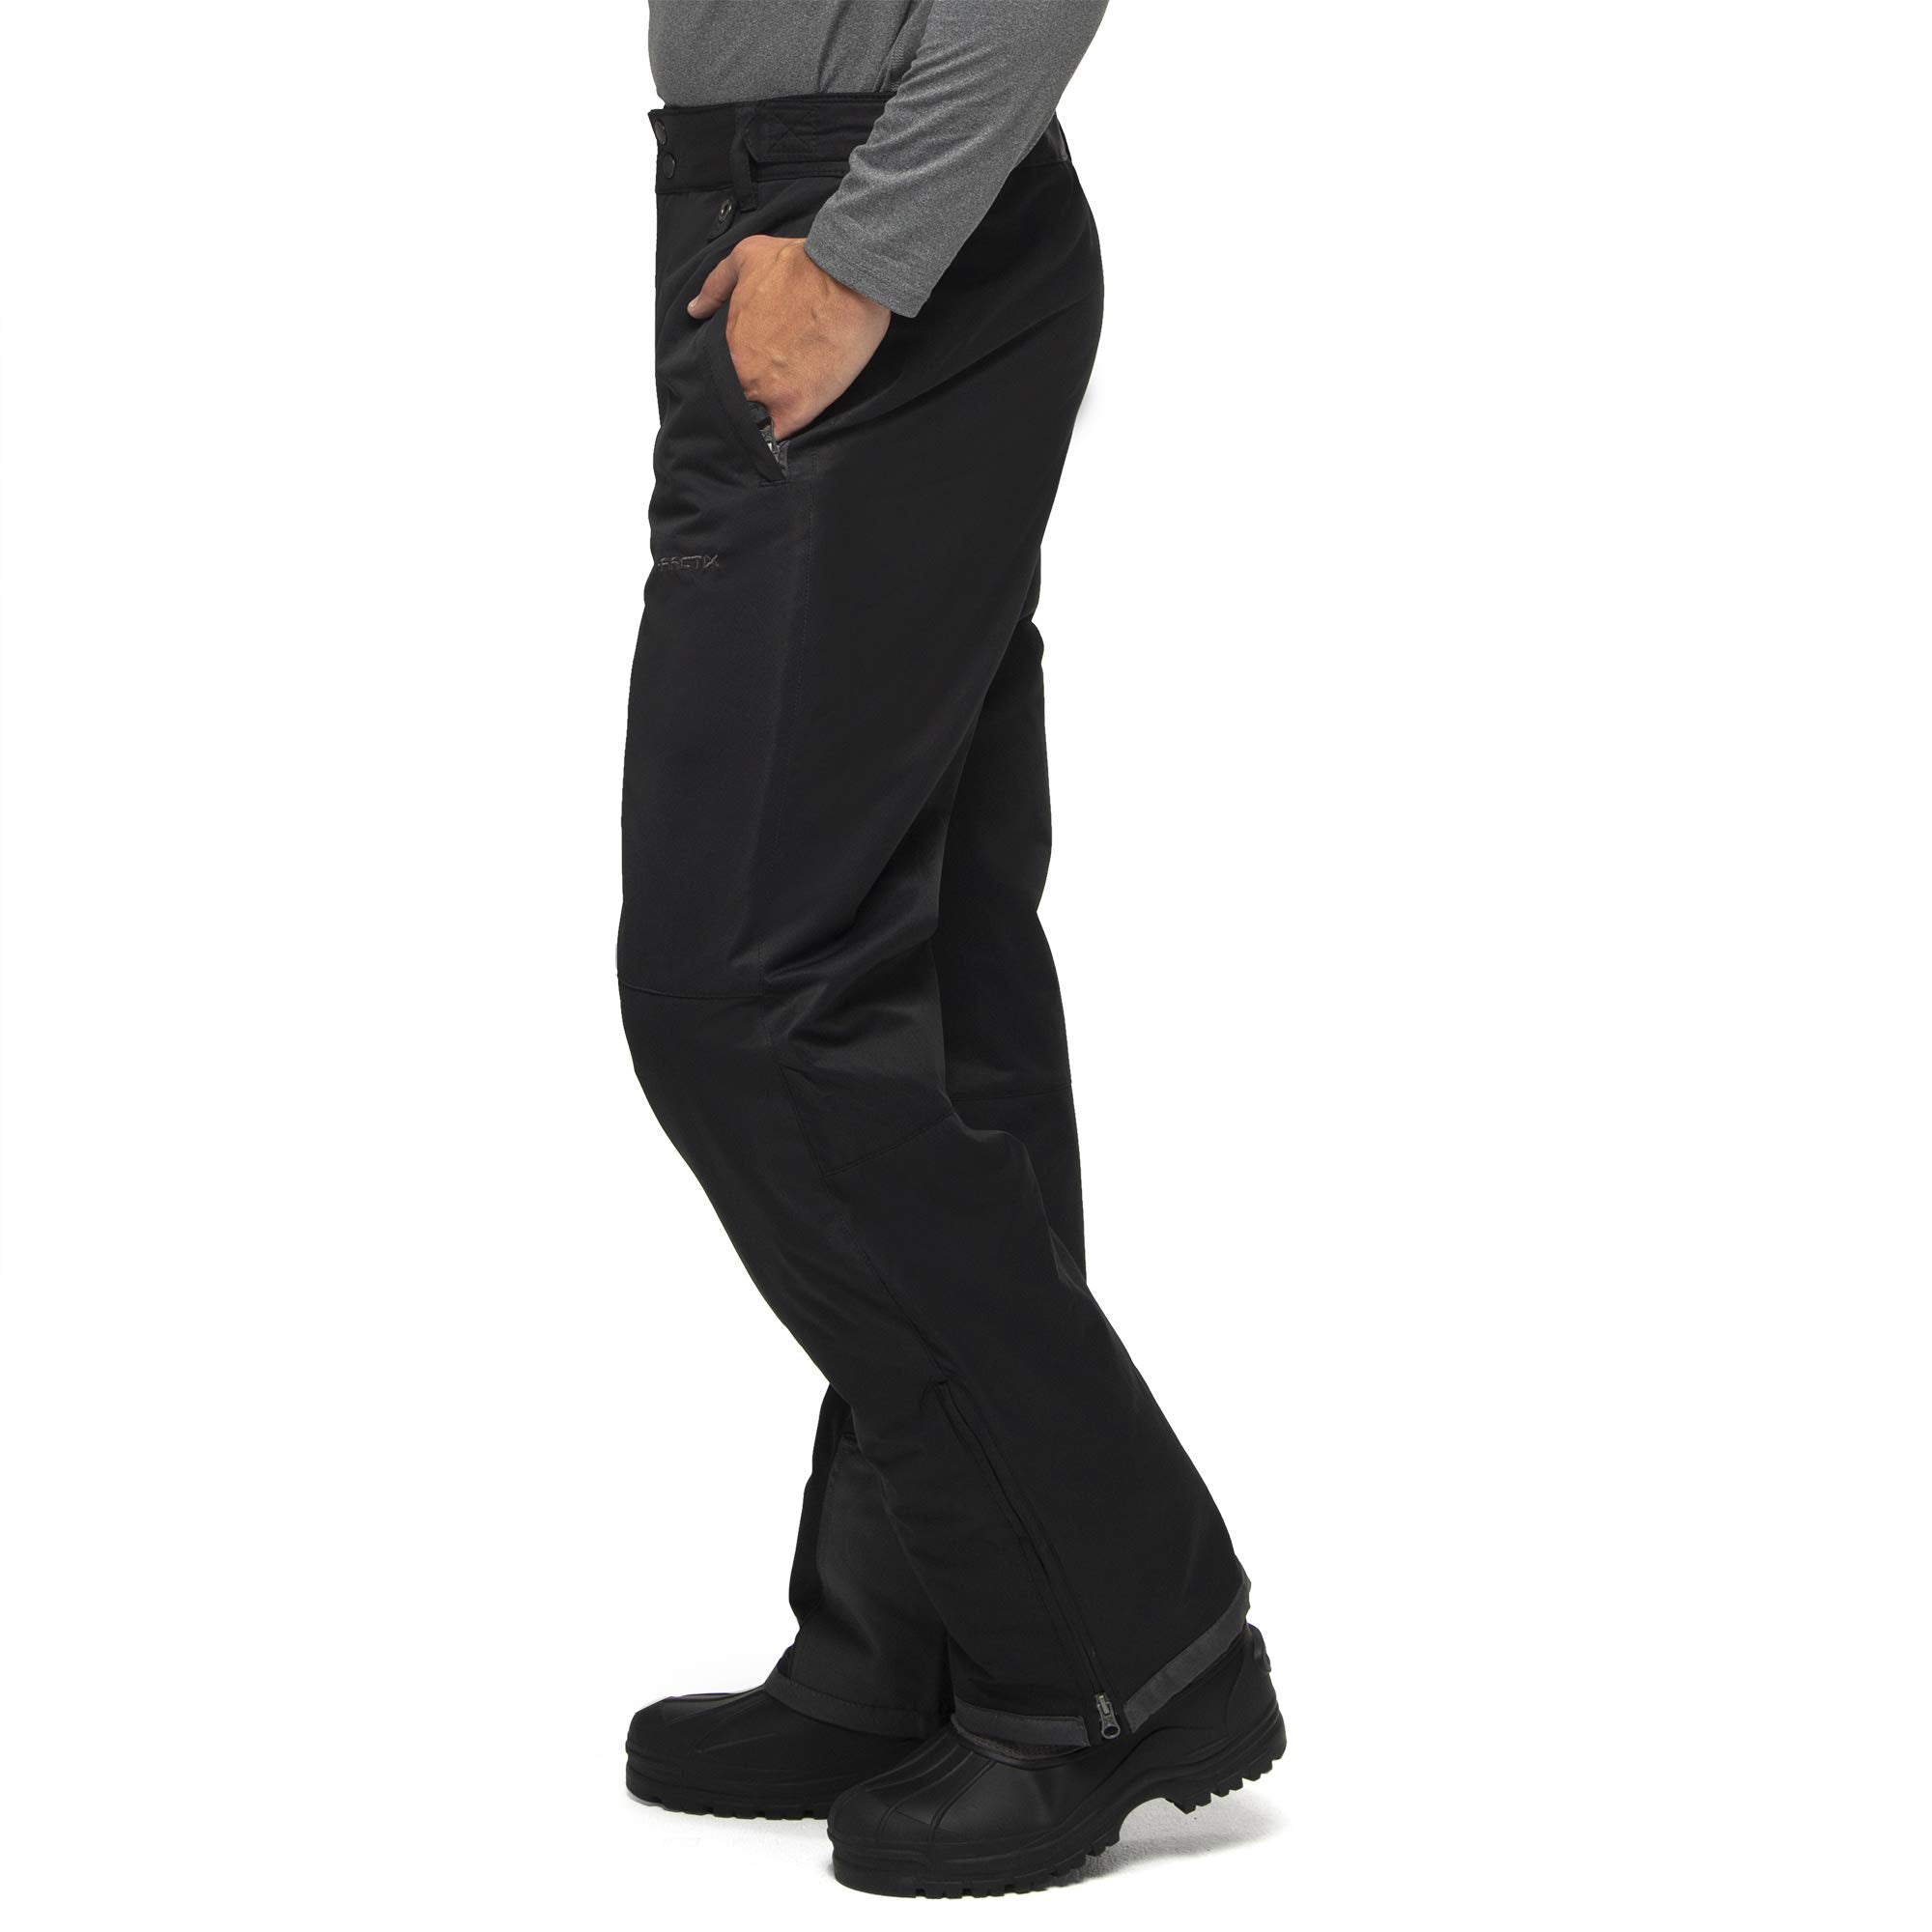 Arctix Men's Insulated Ski Pants 32L, XXL *BRAND NEW* for Sale in